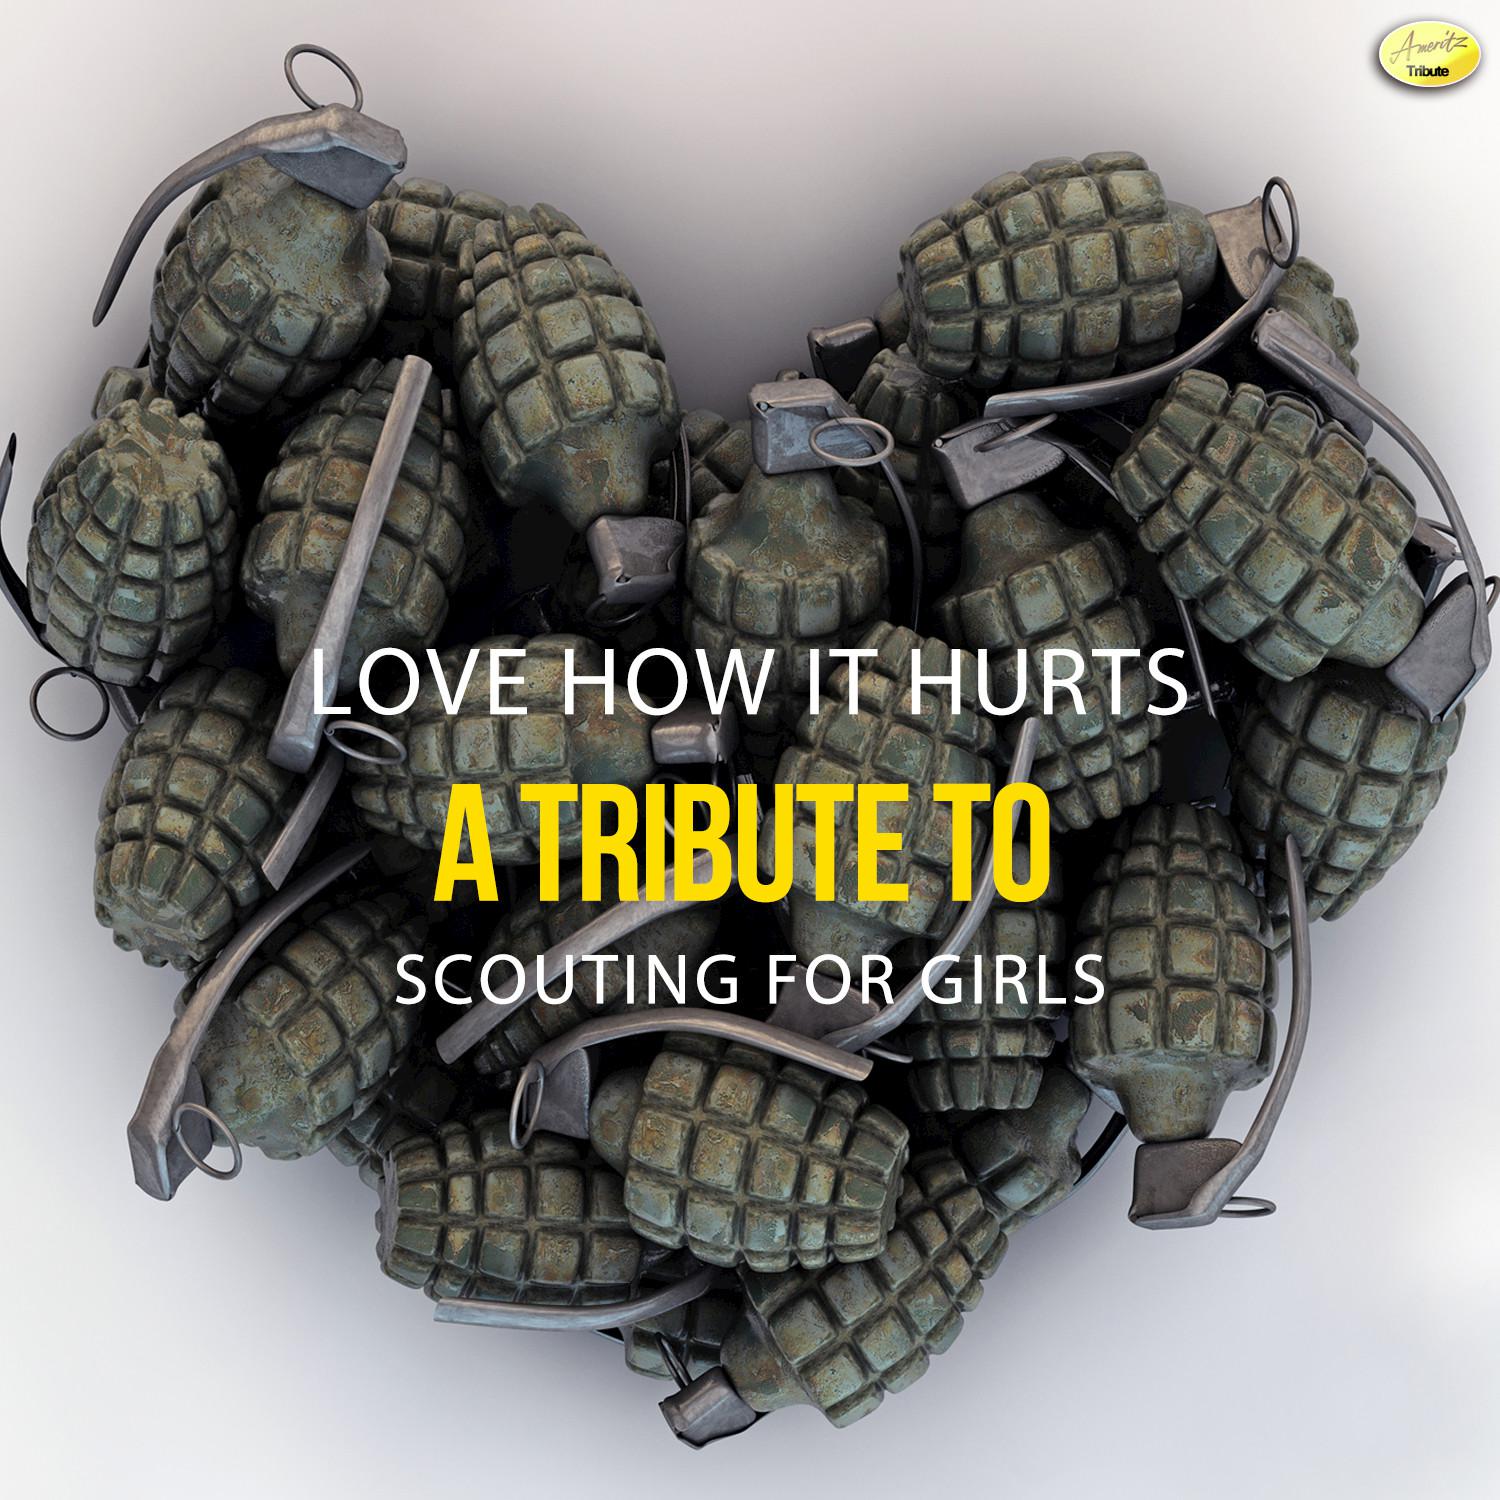 Love How It Hurts - A Tribute to Scouting for Girls